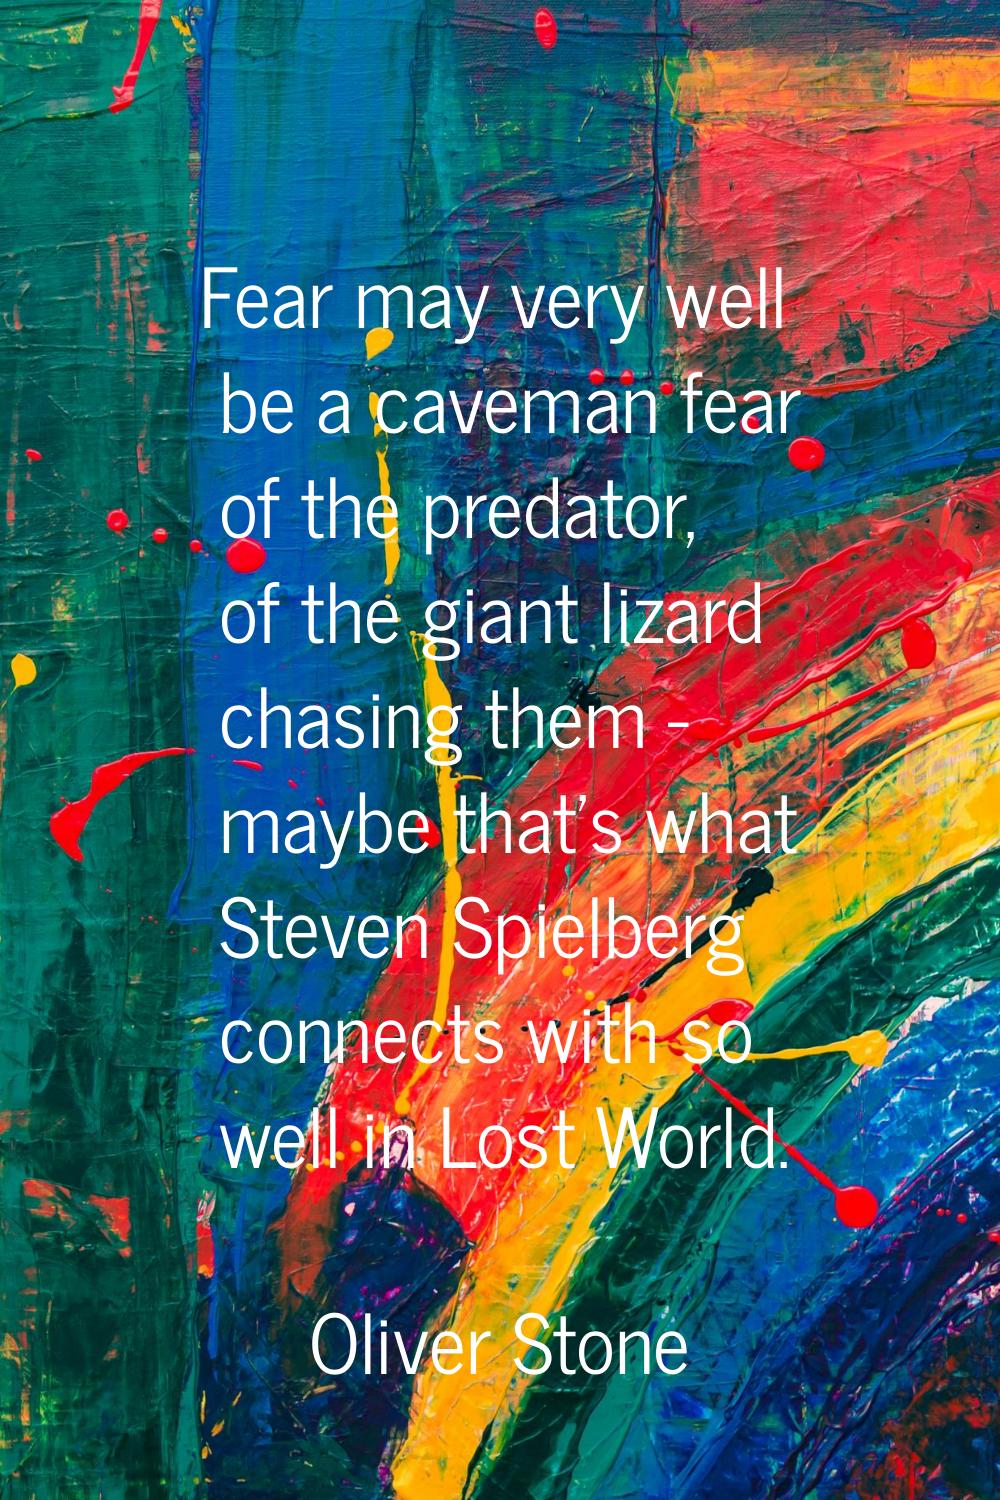 Fear may very well be a caveman fear of the predator, of the giant lizard chasing them - maybe that